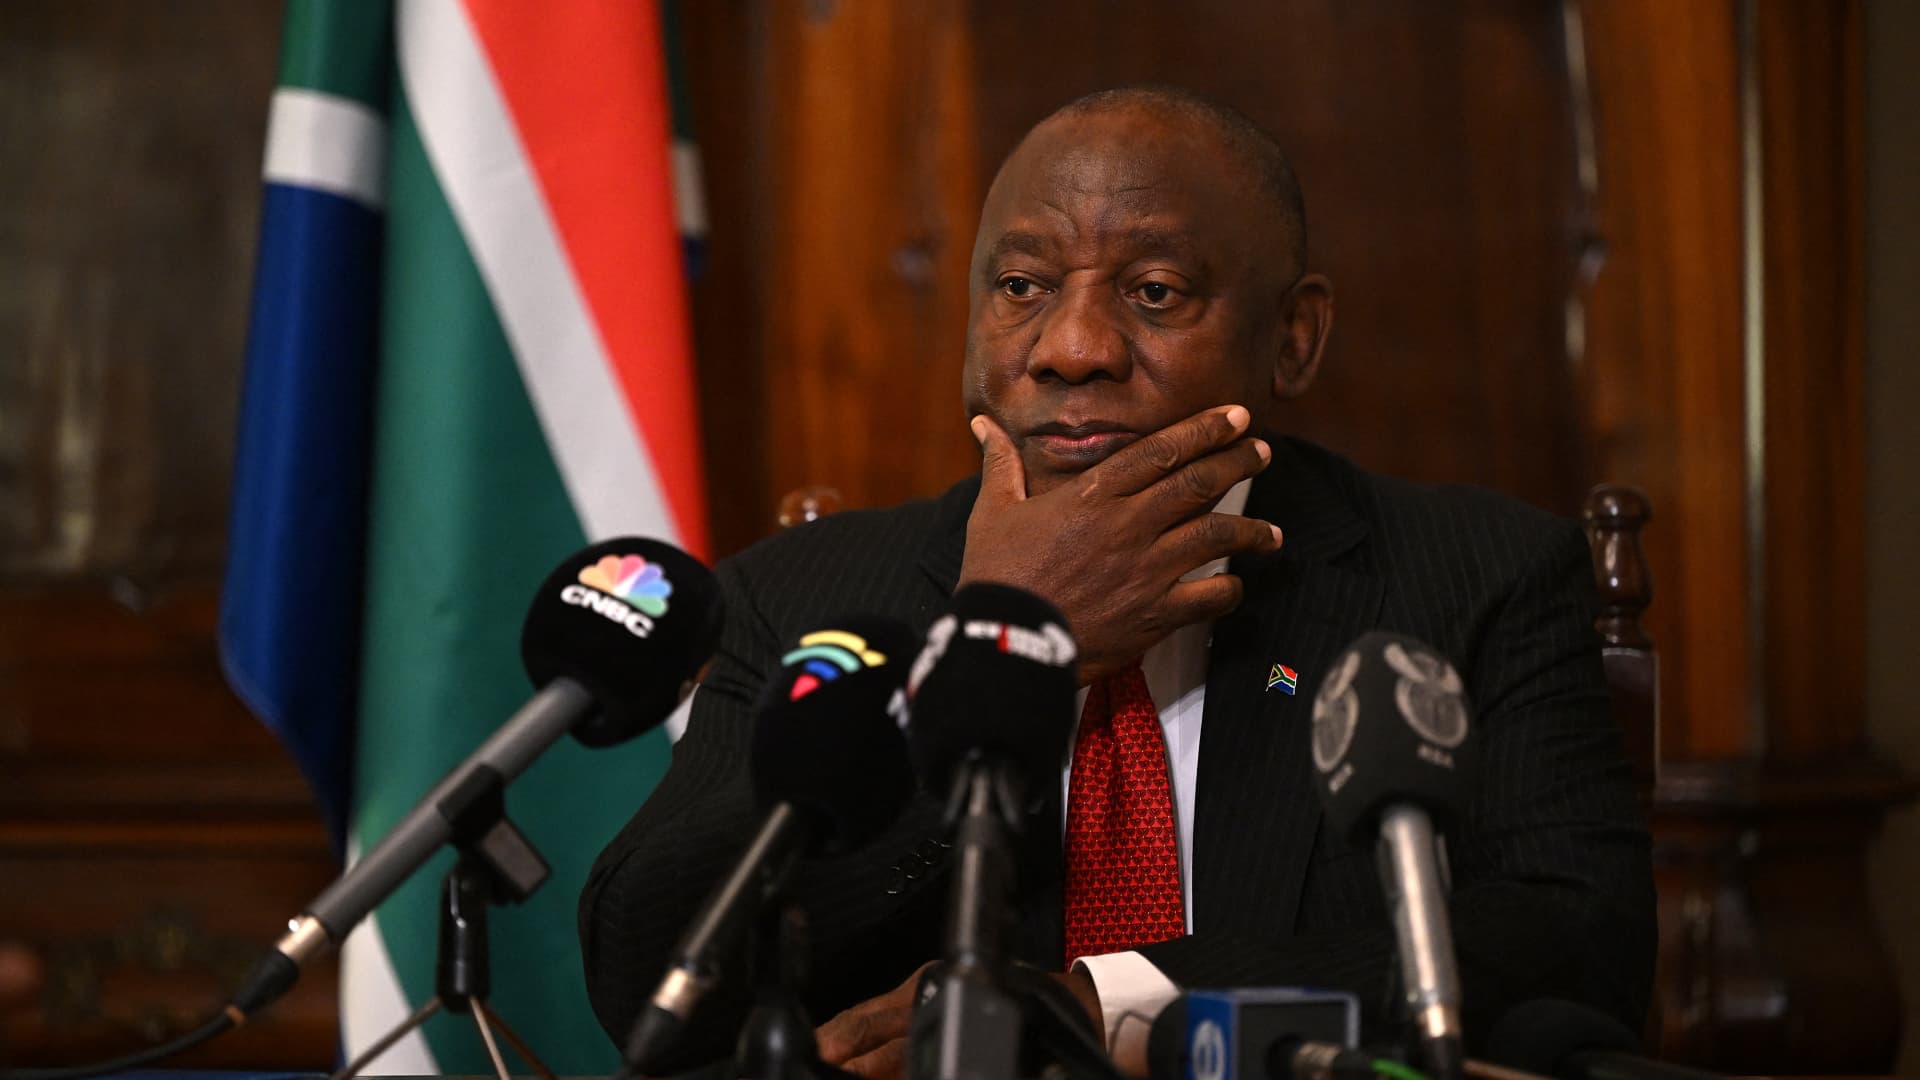 South Africa: Election Poses Risks to Economy